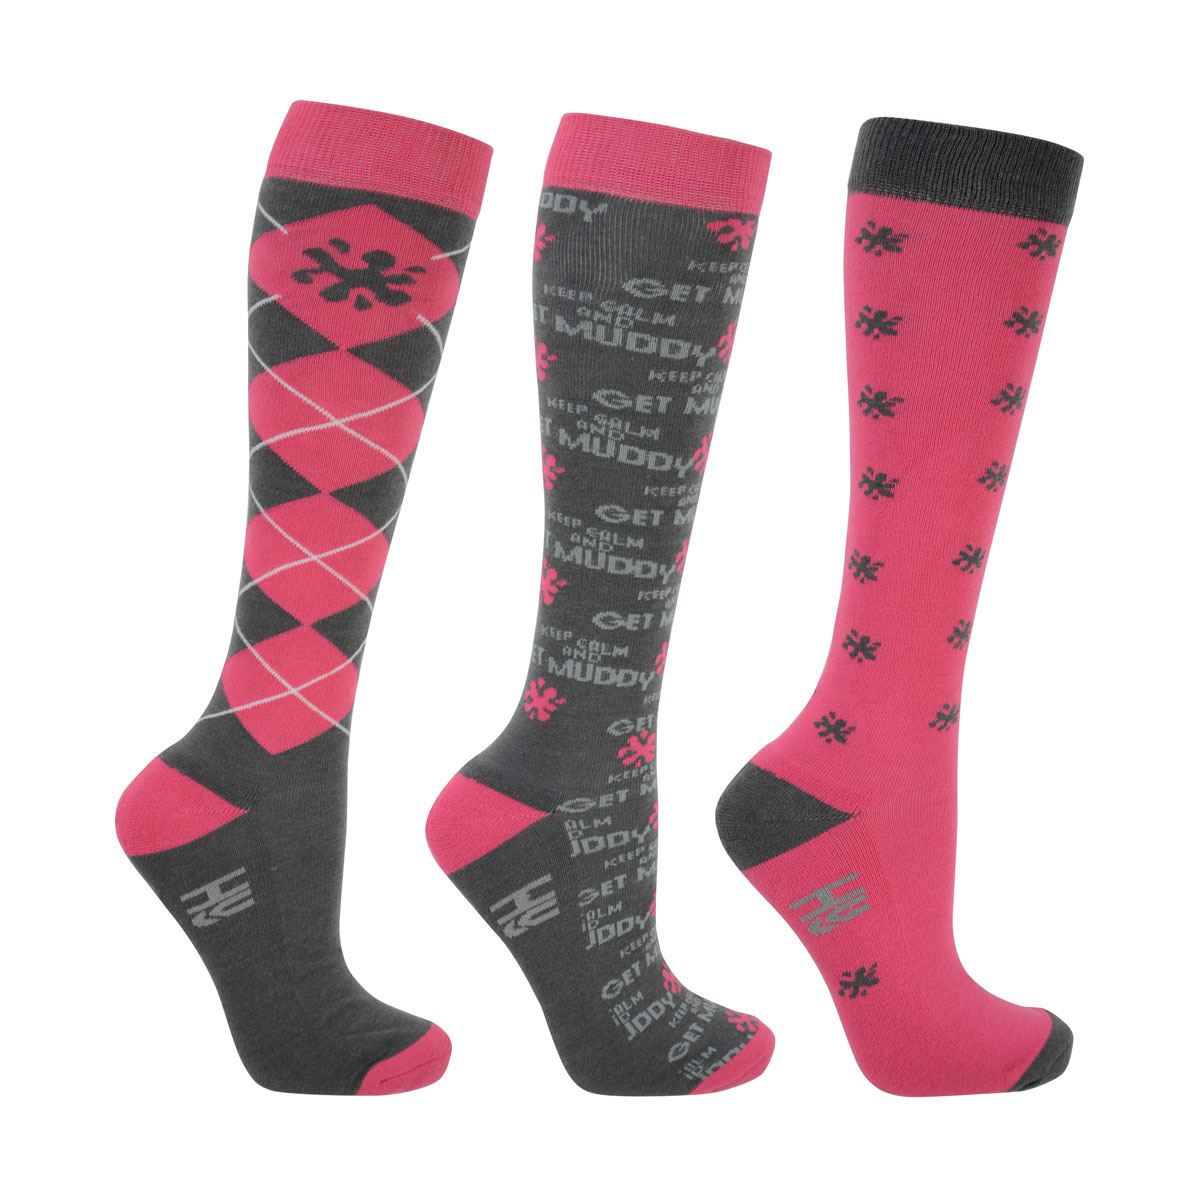 Hy Equestrian Keep Calm and Get Muddy Socks (Pack of 3) - Just Horse Riders